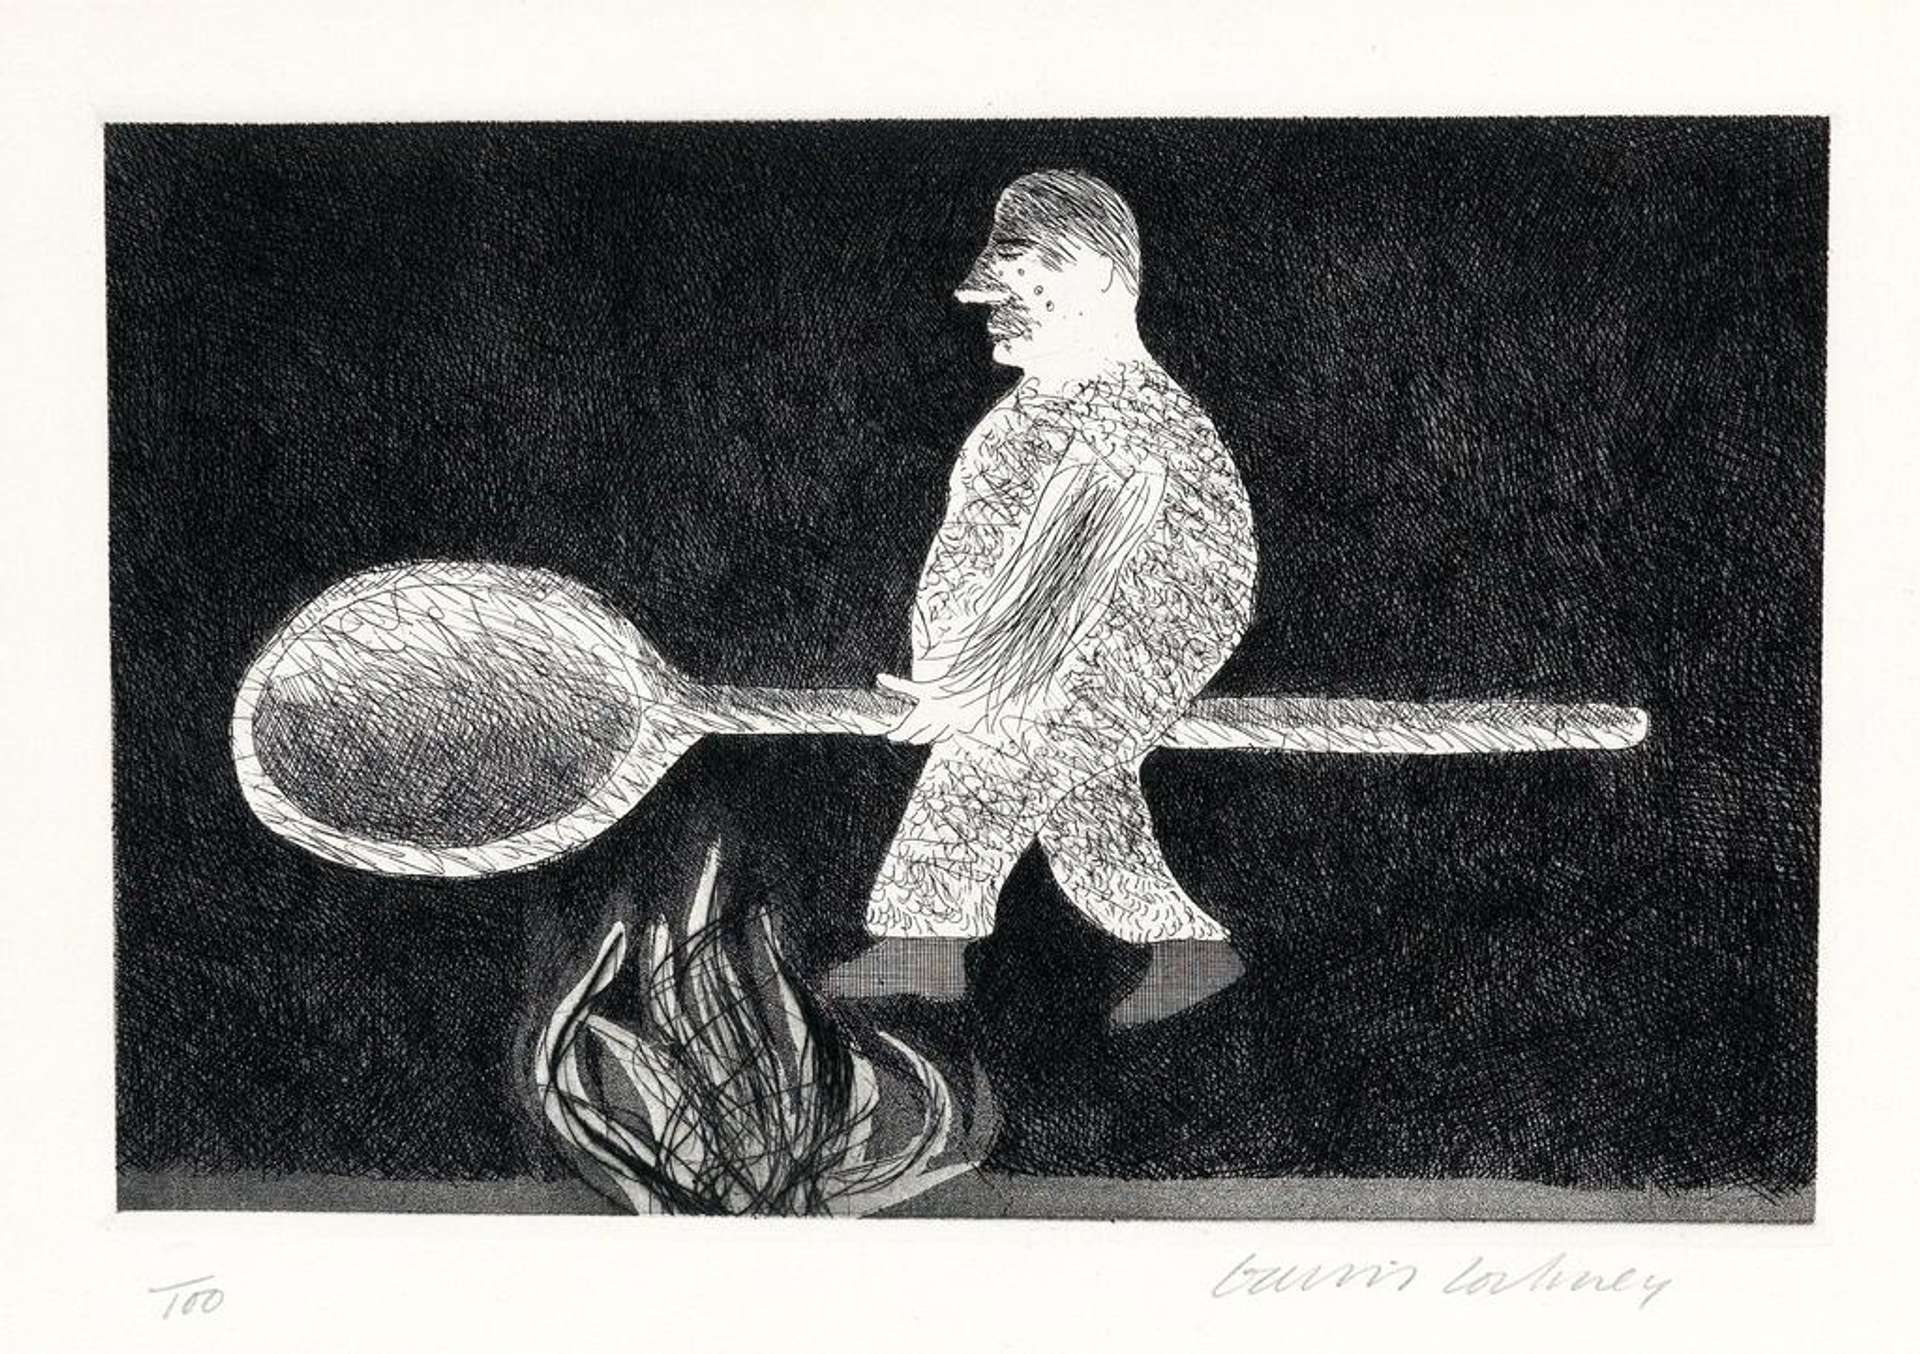 Against a dark background of thickly hatched marks, a man is shown riding a wooden spoon. He is dressed in a kind of fuzzy overall that resembles a hairshirt. His face is darkened and his eyes closed as his feet dance over the fire below.